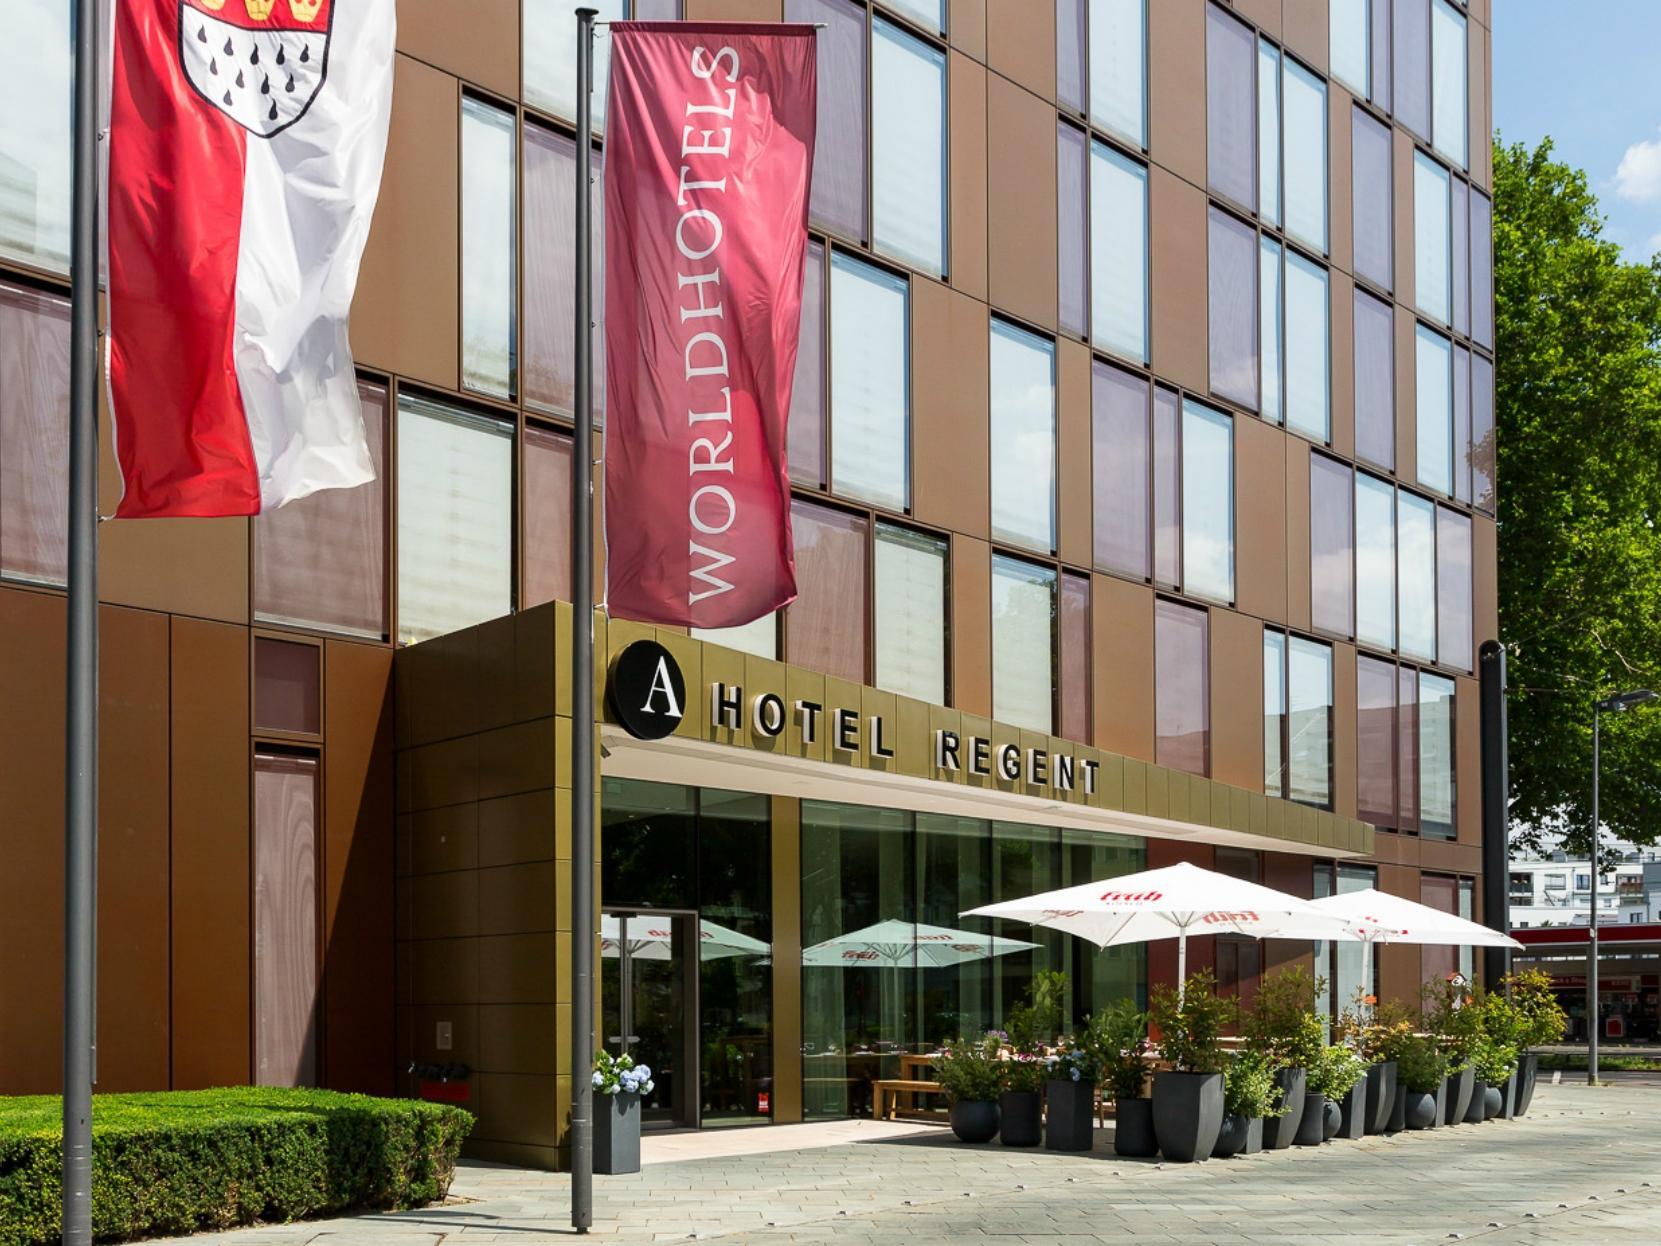 Ameron Hotel Regent Germany
 FAQ 2016, What facilities are there in Ameron Hotel Regent Germany
 2016, What Languages Spoken are Supported in Ameron Hotel Regent Germany
 2016, Which payment cards are accepted in Ameron Hotel Regent Germany
 , Germany
 Ameron Hotel Regent room facilities and services Q&A 2016, Germany
 Ameron Hotel Regent online booking services 2016, Germany
 Ameron Hotel Regent address 2016, Germany
 Ameron Hotel Regent telephone number 2016,Germany
 Ameron Hotel Regent map 2016, Germany
 Ameron Hotel Regent traffic guide 2016, how to go Germany
 Ameron Hotel Regent, Germany
 Ameron Hotel Regent booking online 2016, Germany
 Ameron Hotel Regent room types 2016.